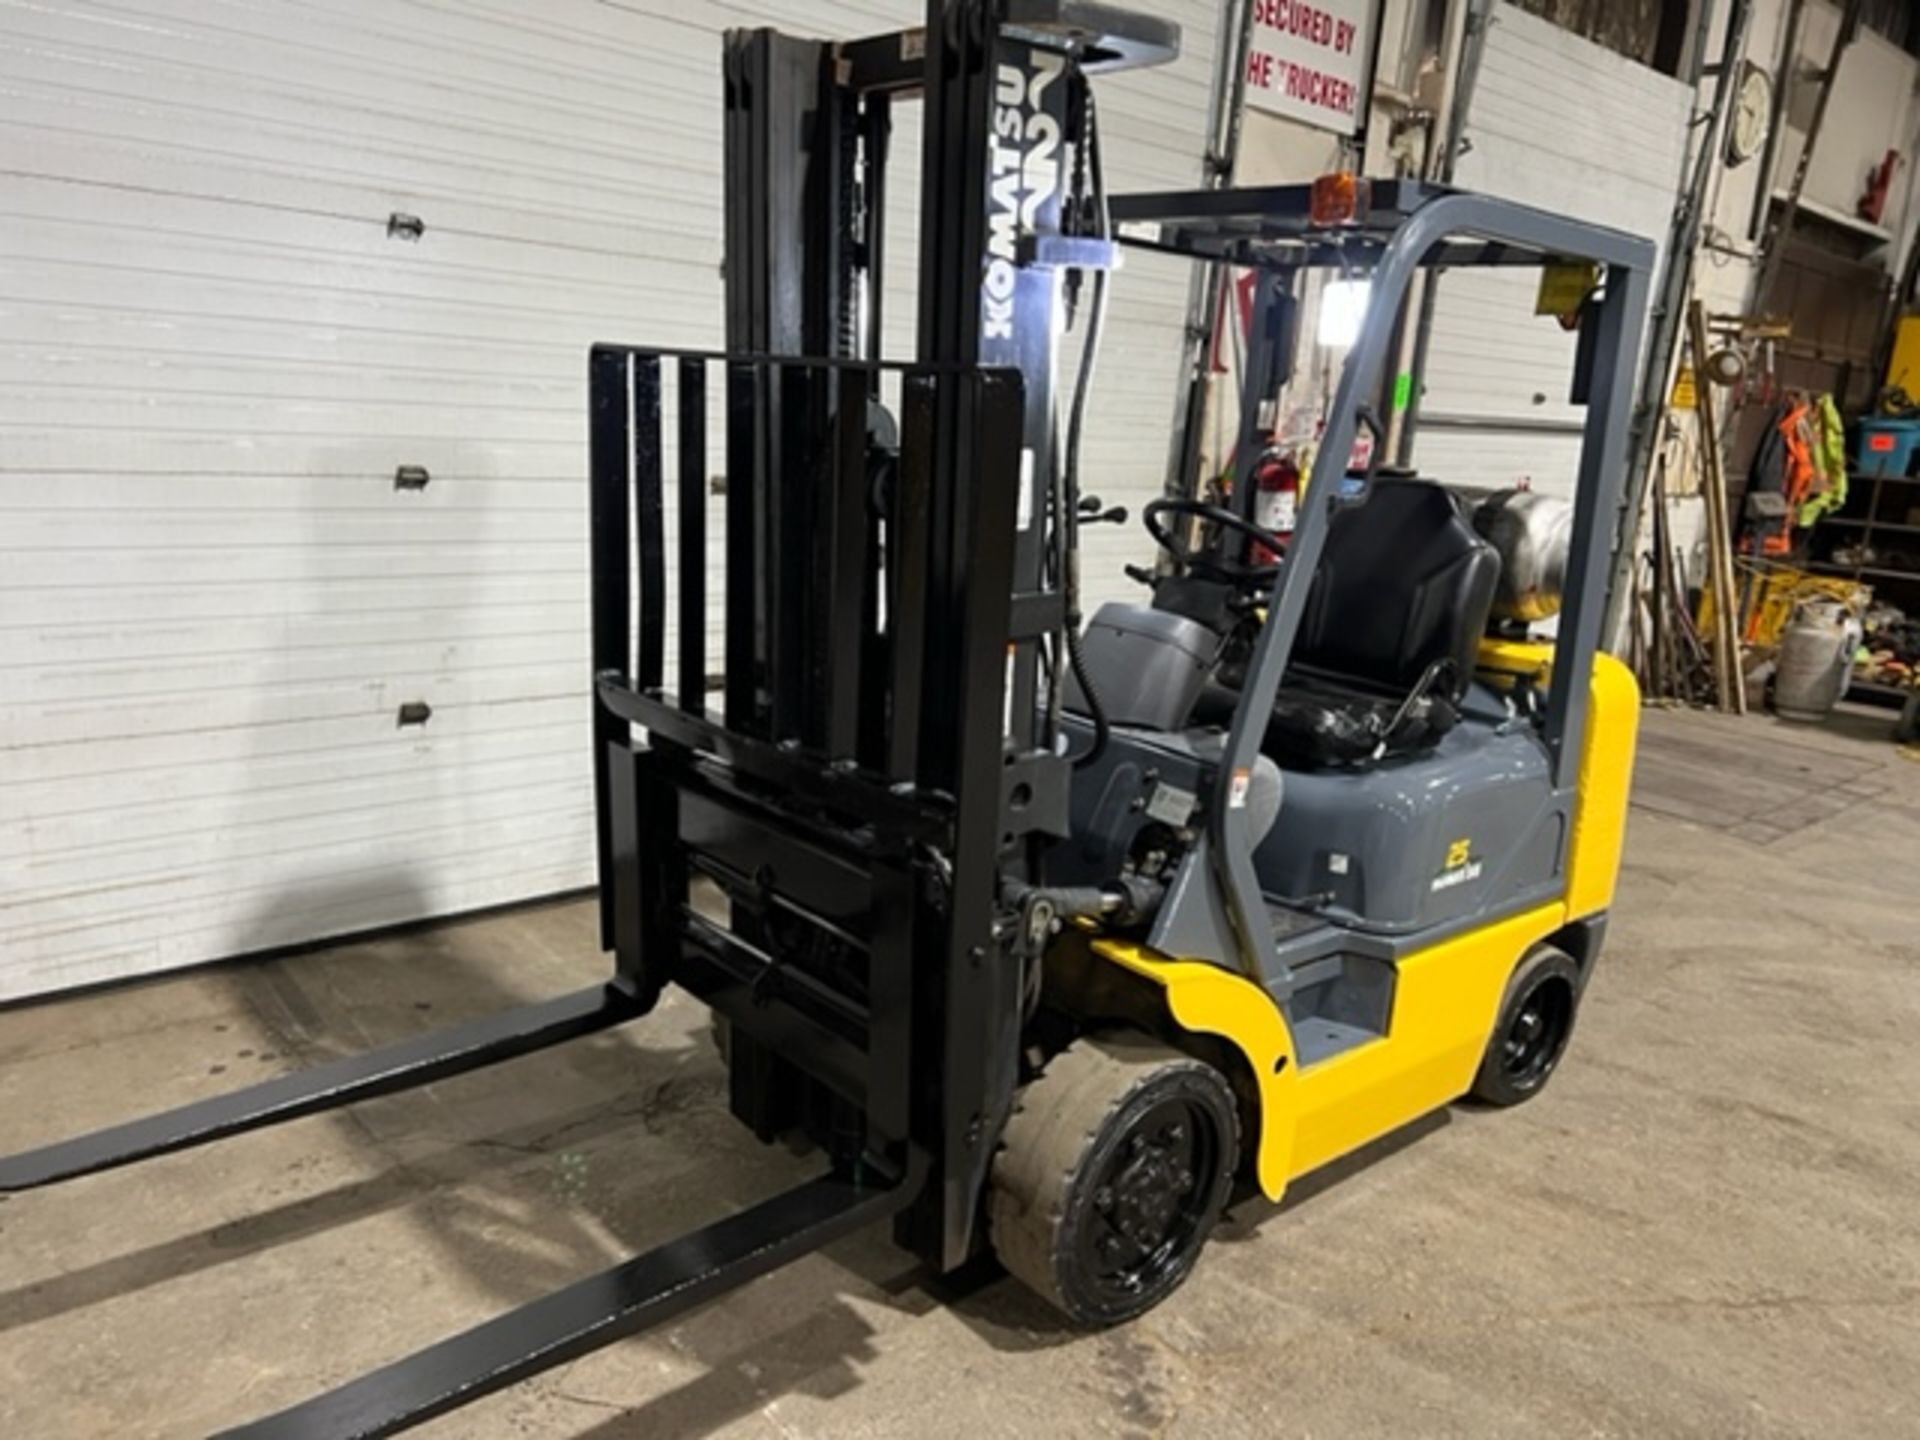 FREE CUSTOMS - Nice Komatsu 5,000lbs Capacity Forklift LPG (Propane) with 3-stage mast with Fork - Image 2 of 3